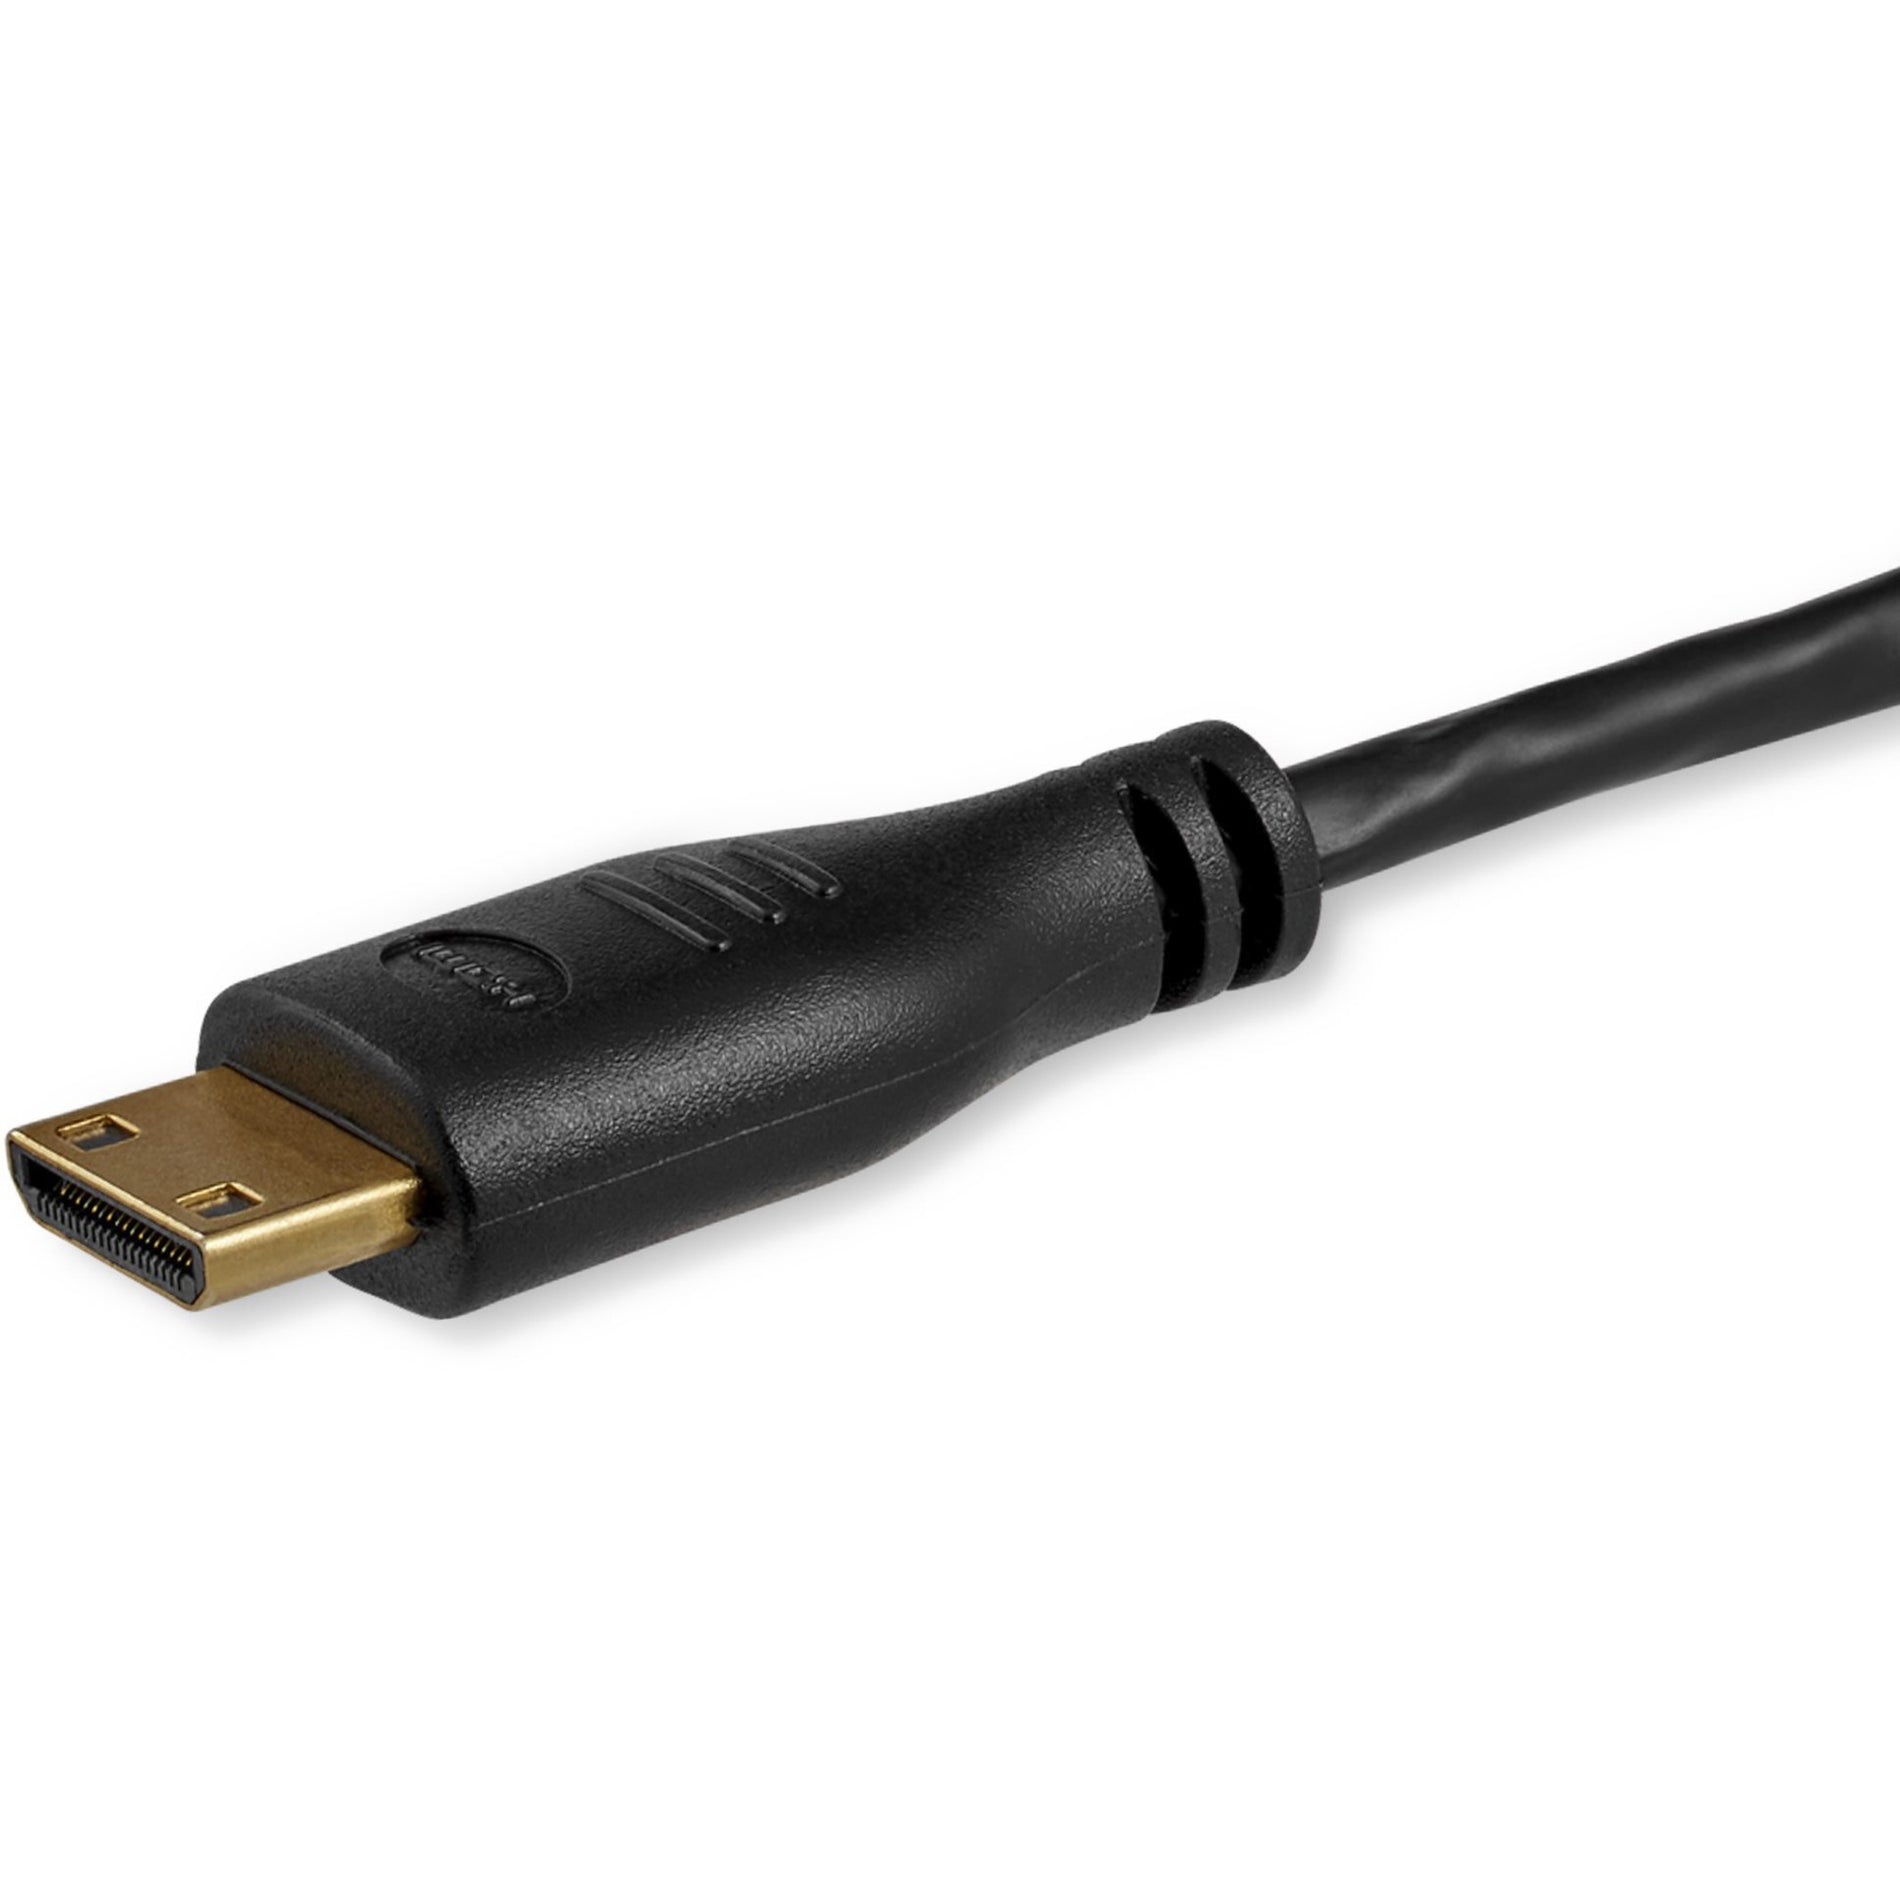 StarTech.com HDMIACMM3S 3 ft Slim HDMI High Speed with Ethernet Cable, HDMI to Mini HDMI